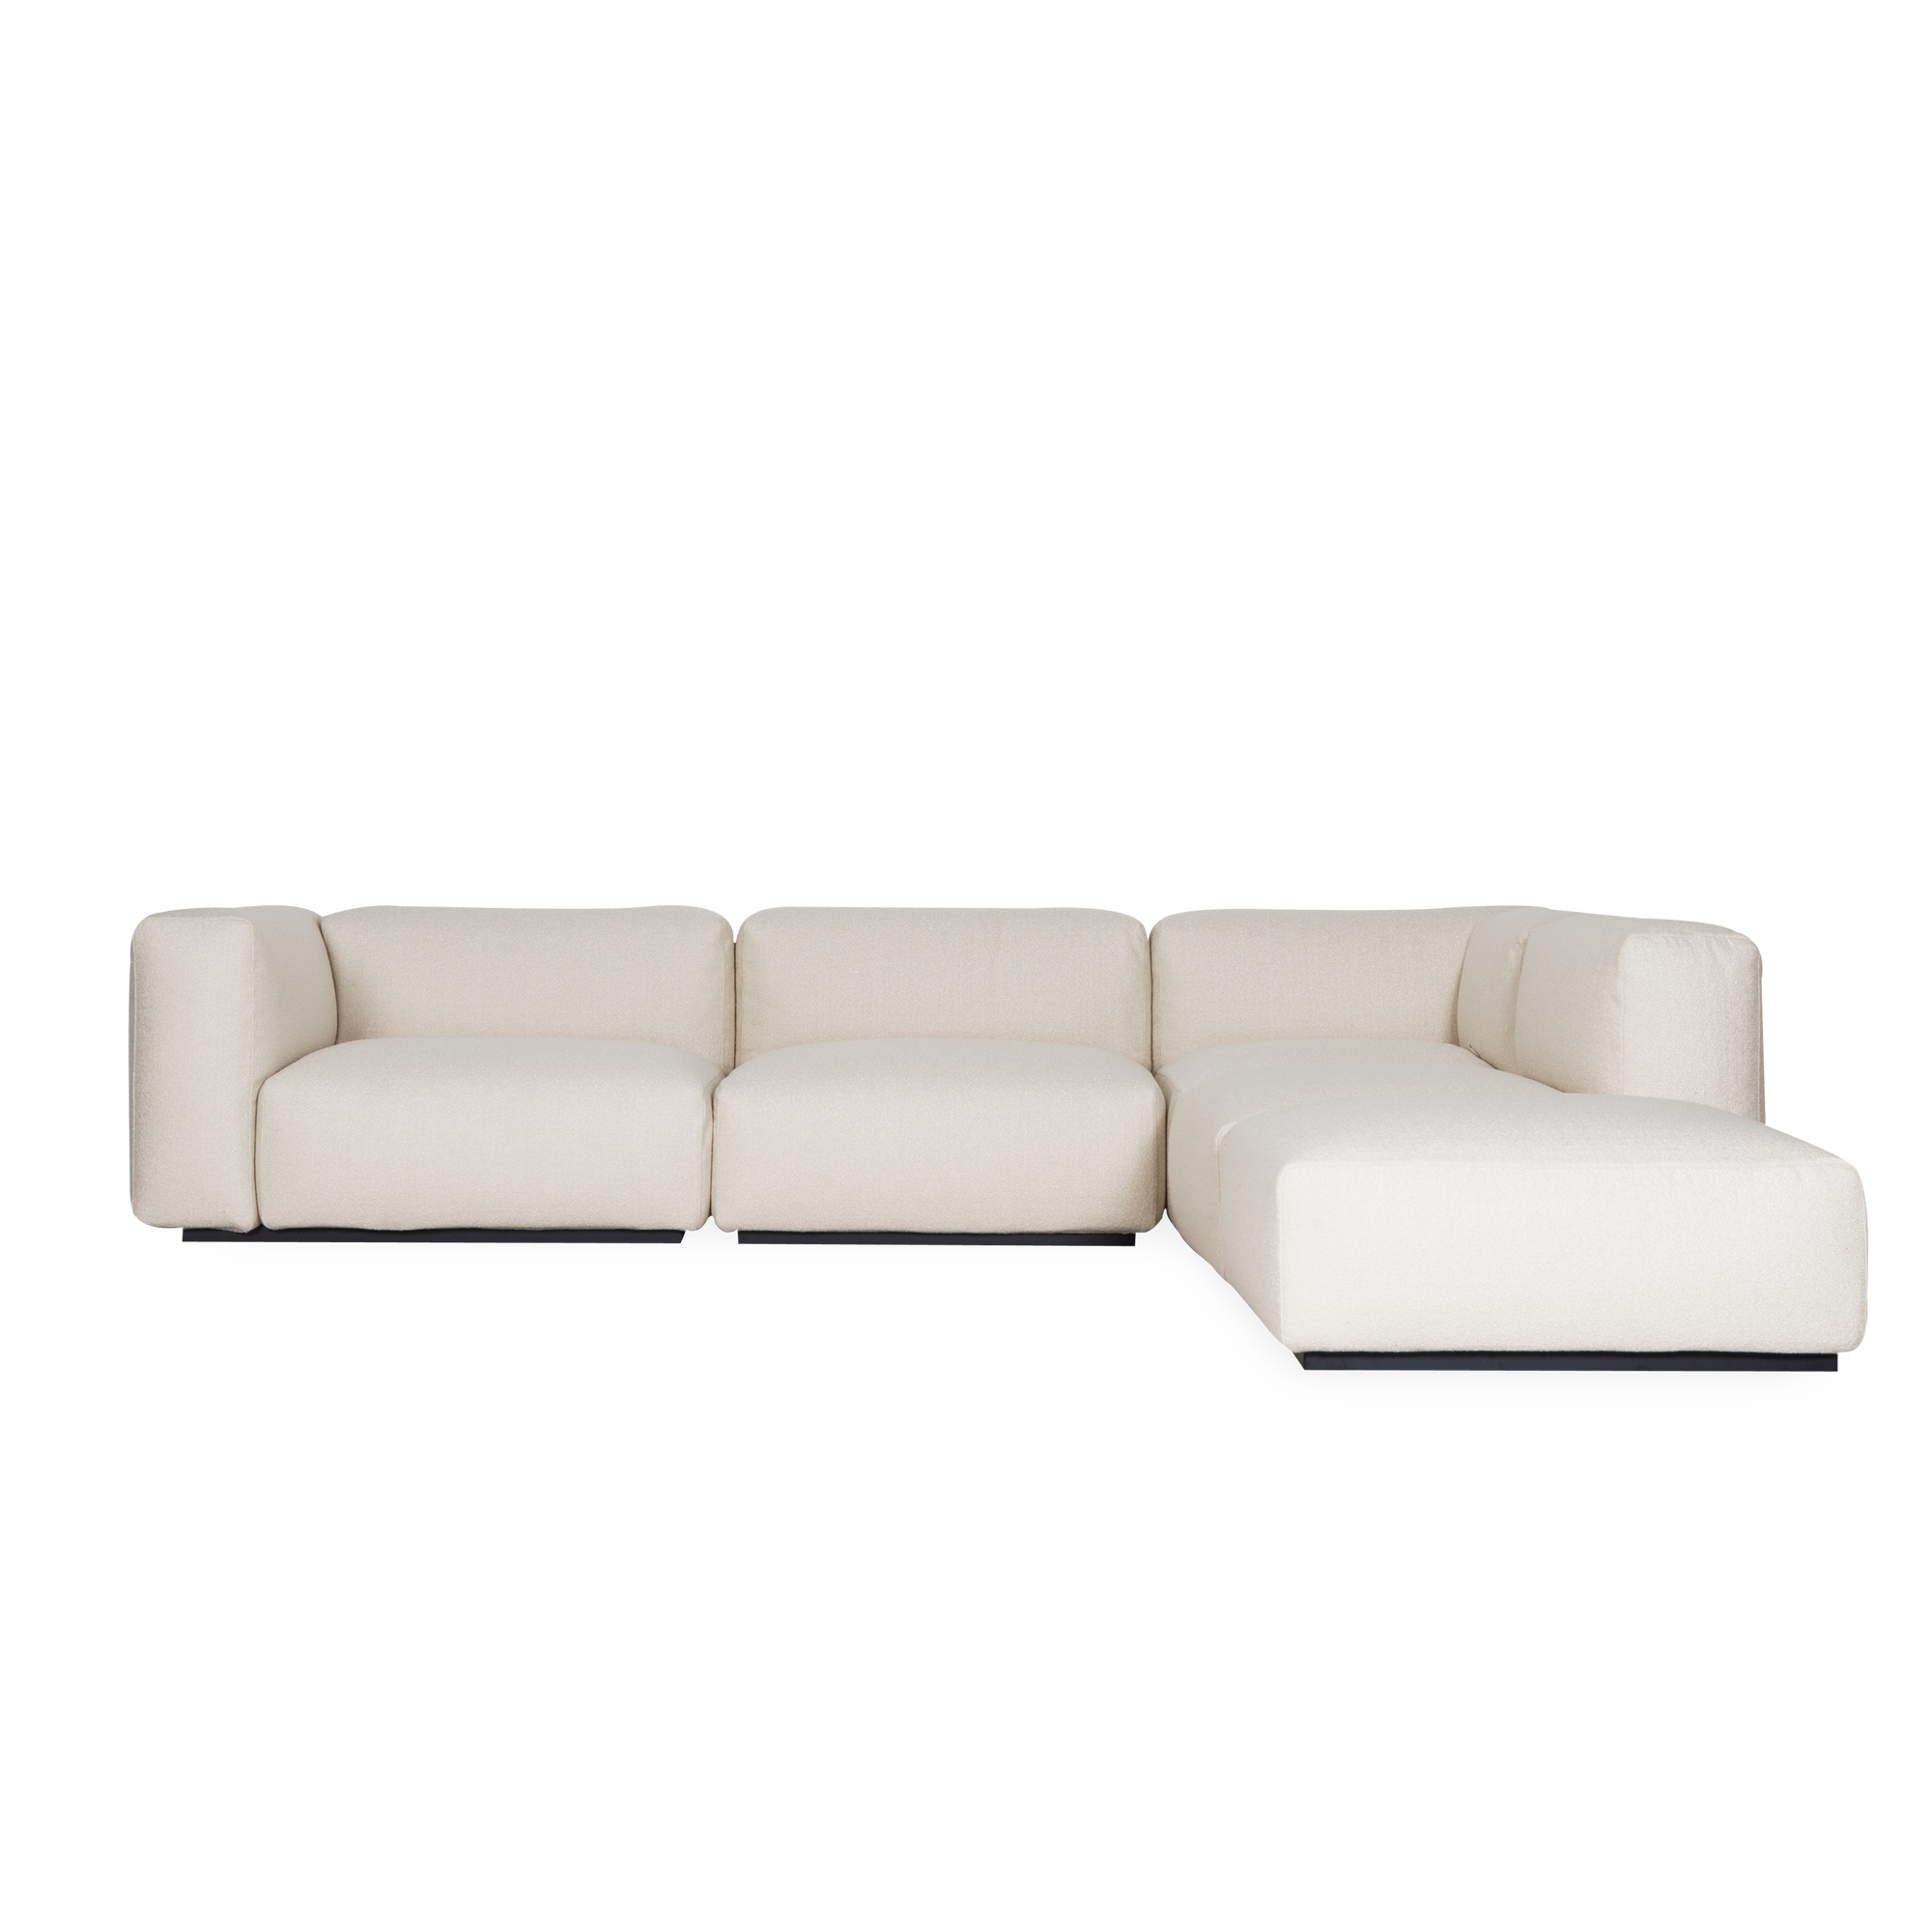 Introduced nearly two decades after its initial launch, the Oblong Modular Sectional by Jasper Morrison has undergone a revision in its architectural design to ensure an even more 